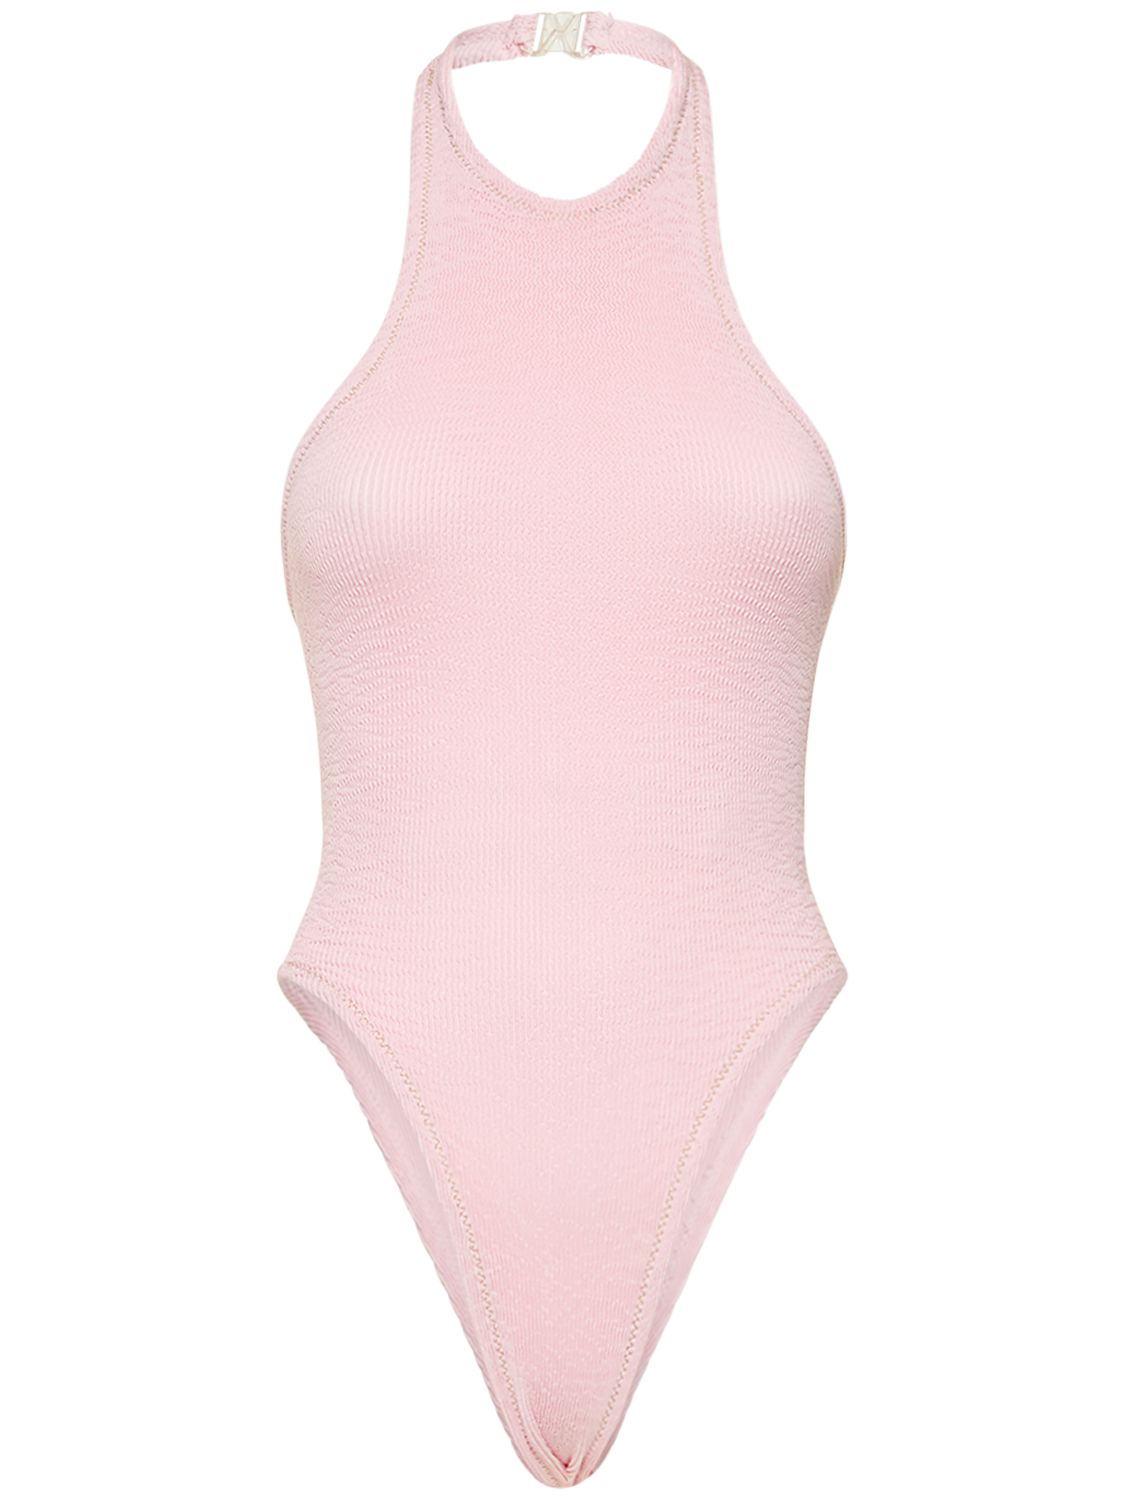 Reina Olga The Surfer Crinkled One Piece Swimsuit In Pink